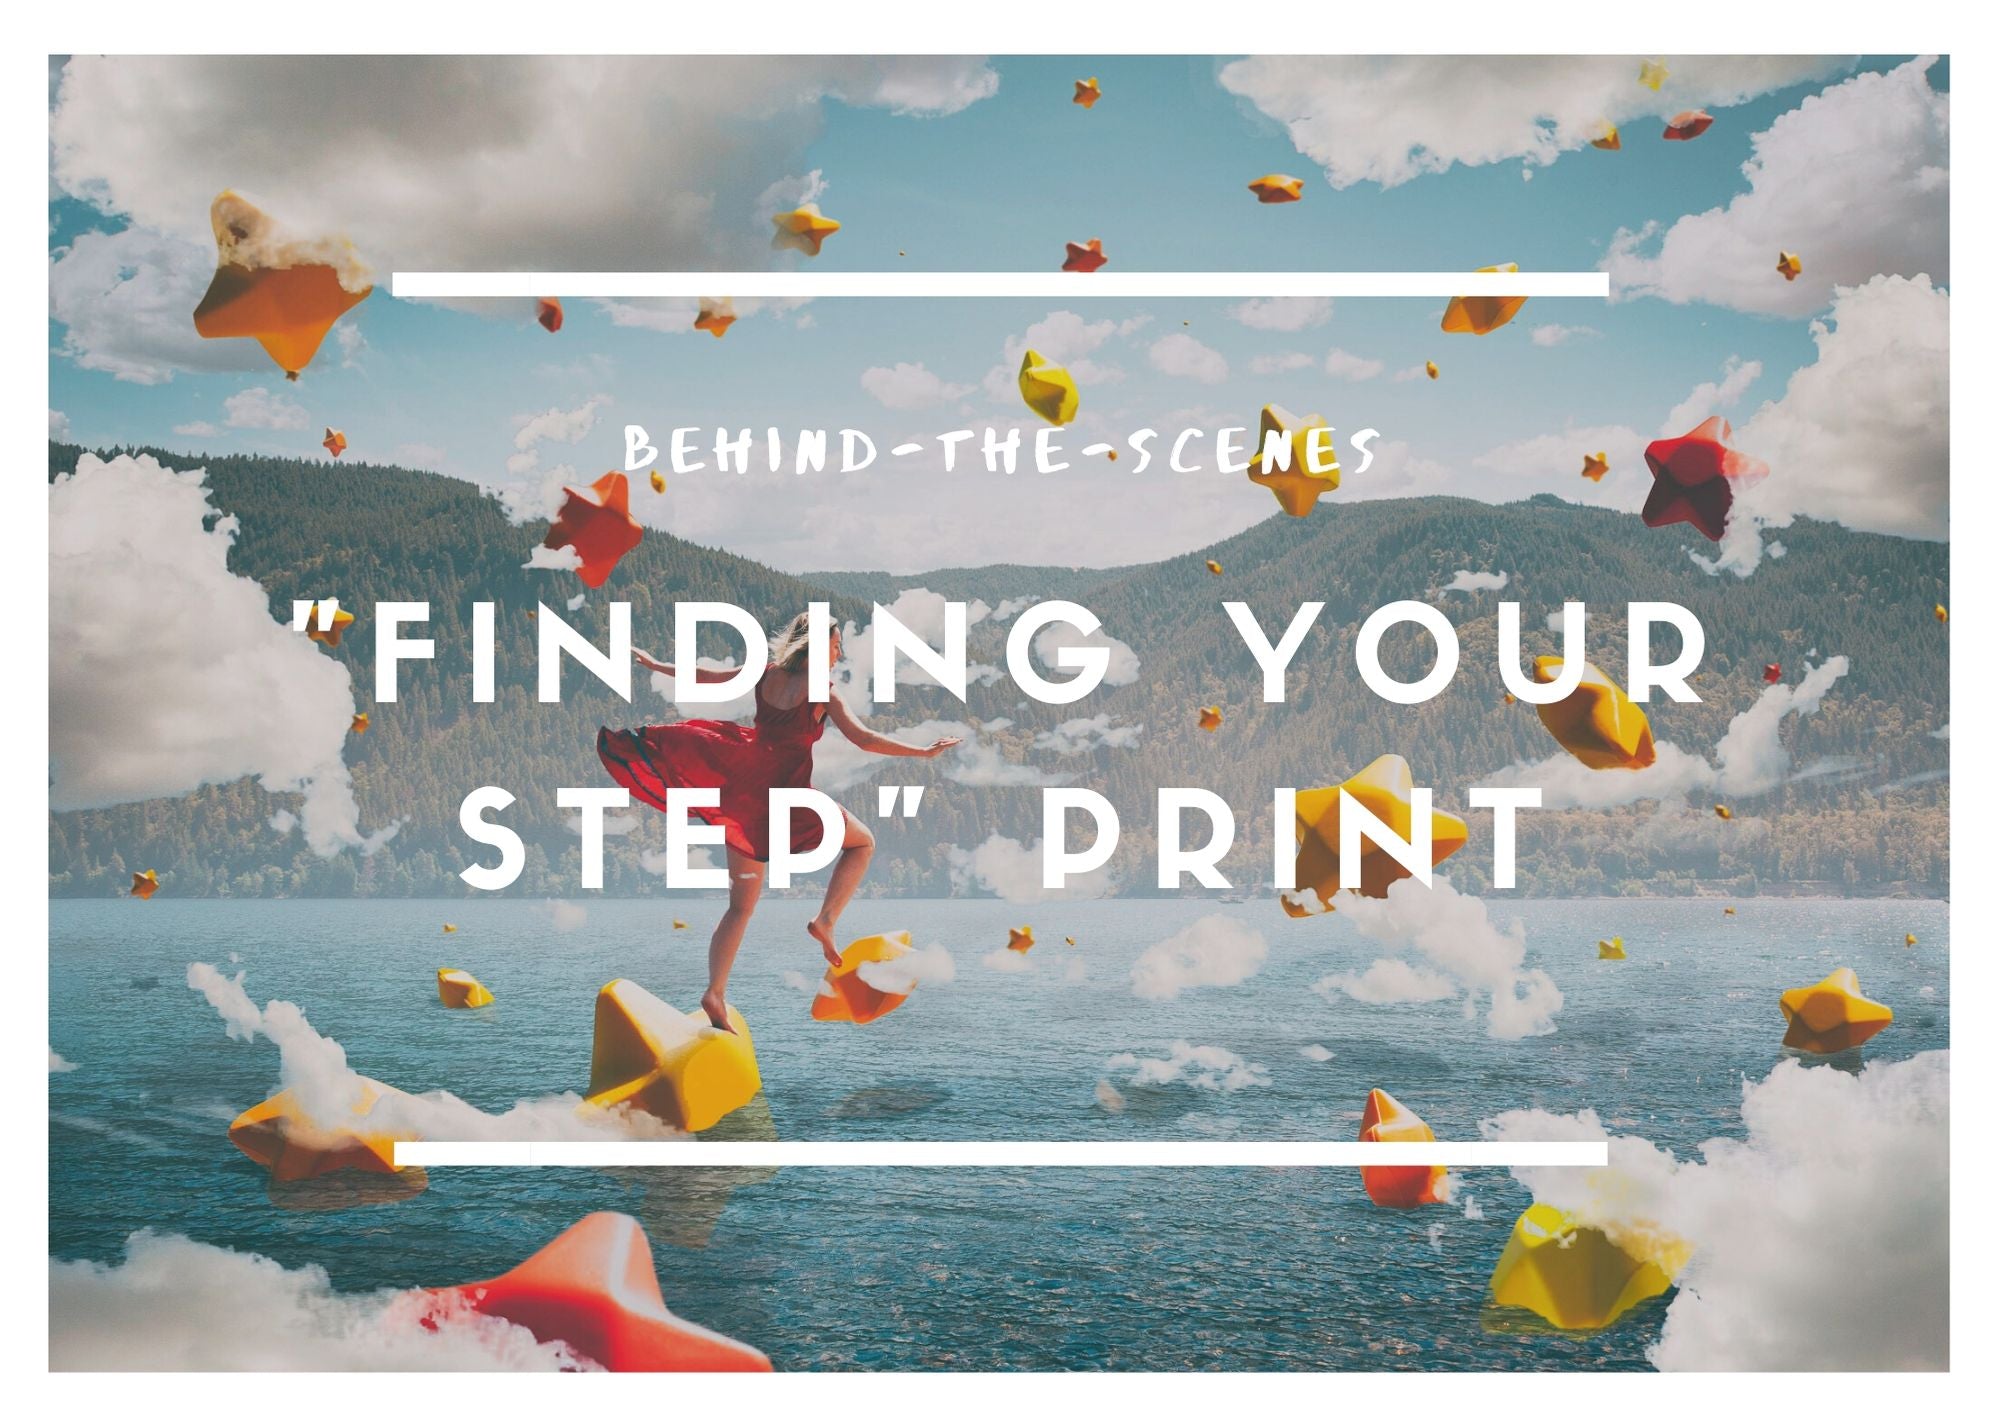 Behind-the-Scenes of My Art: "Finding Your Step"